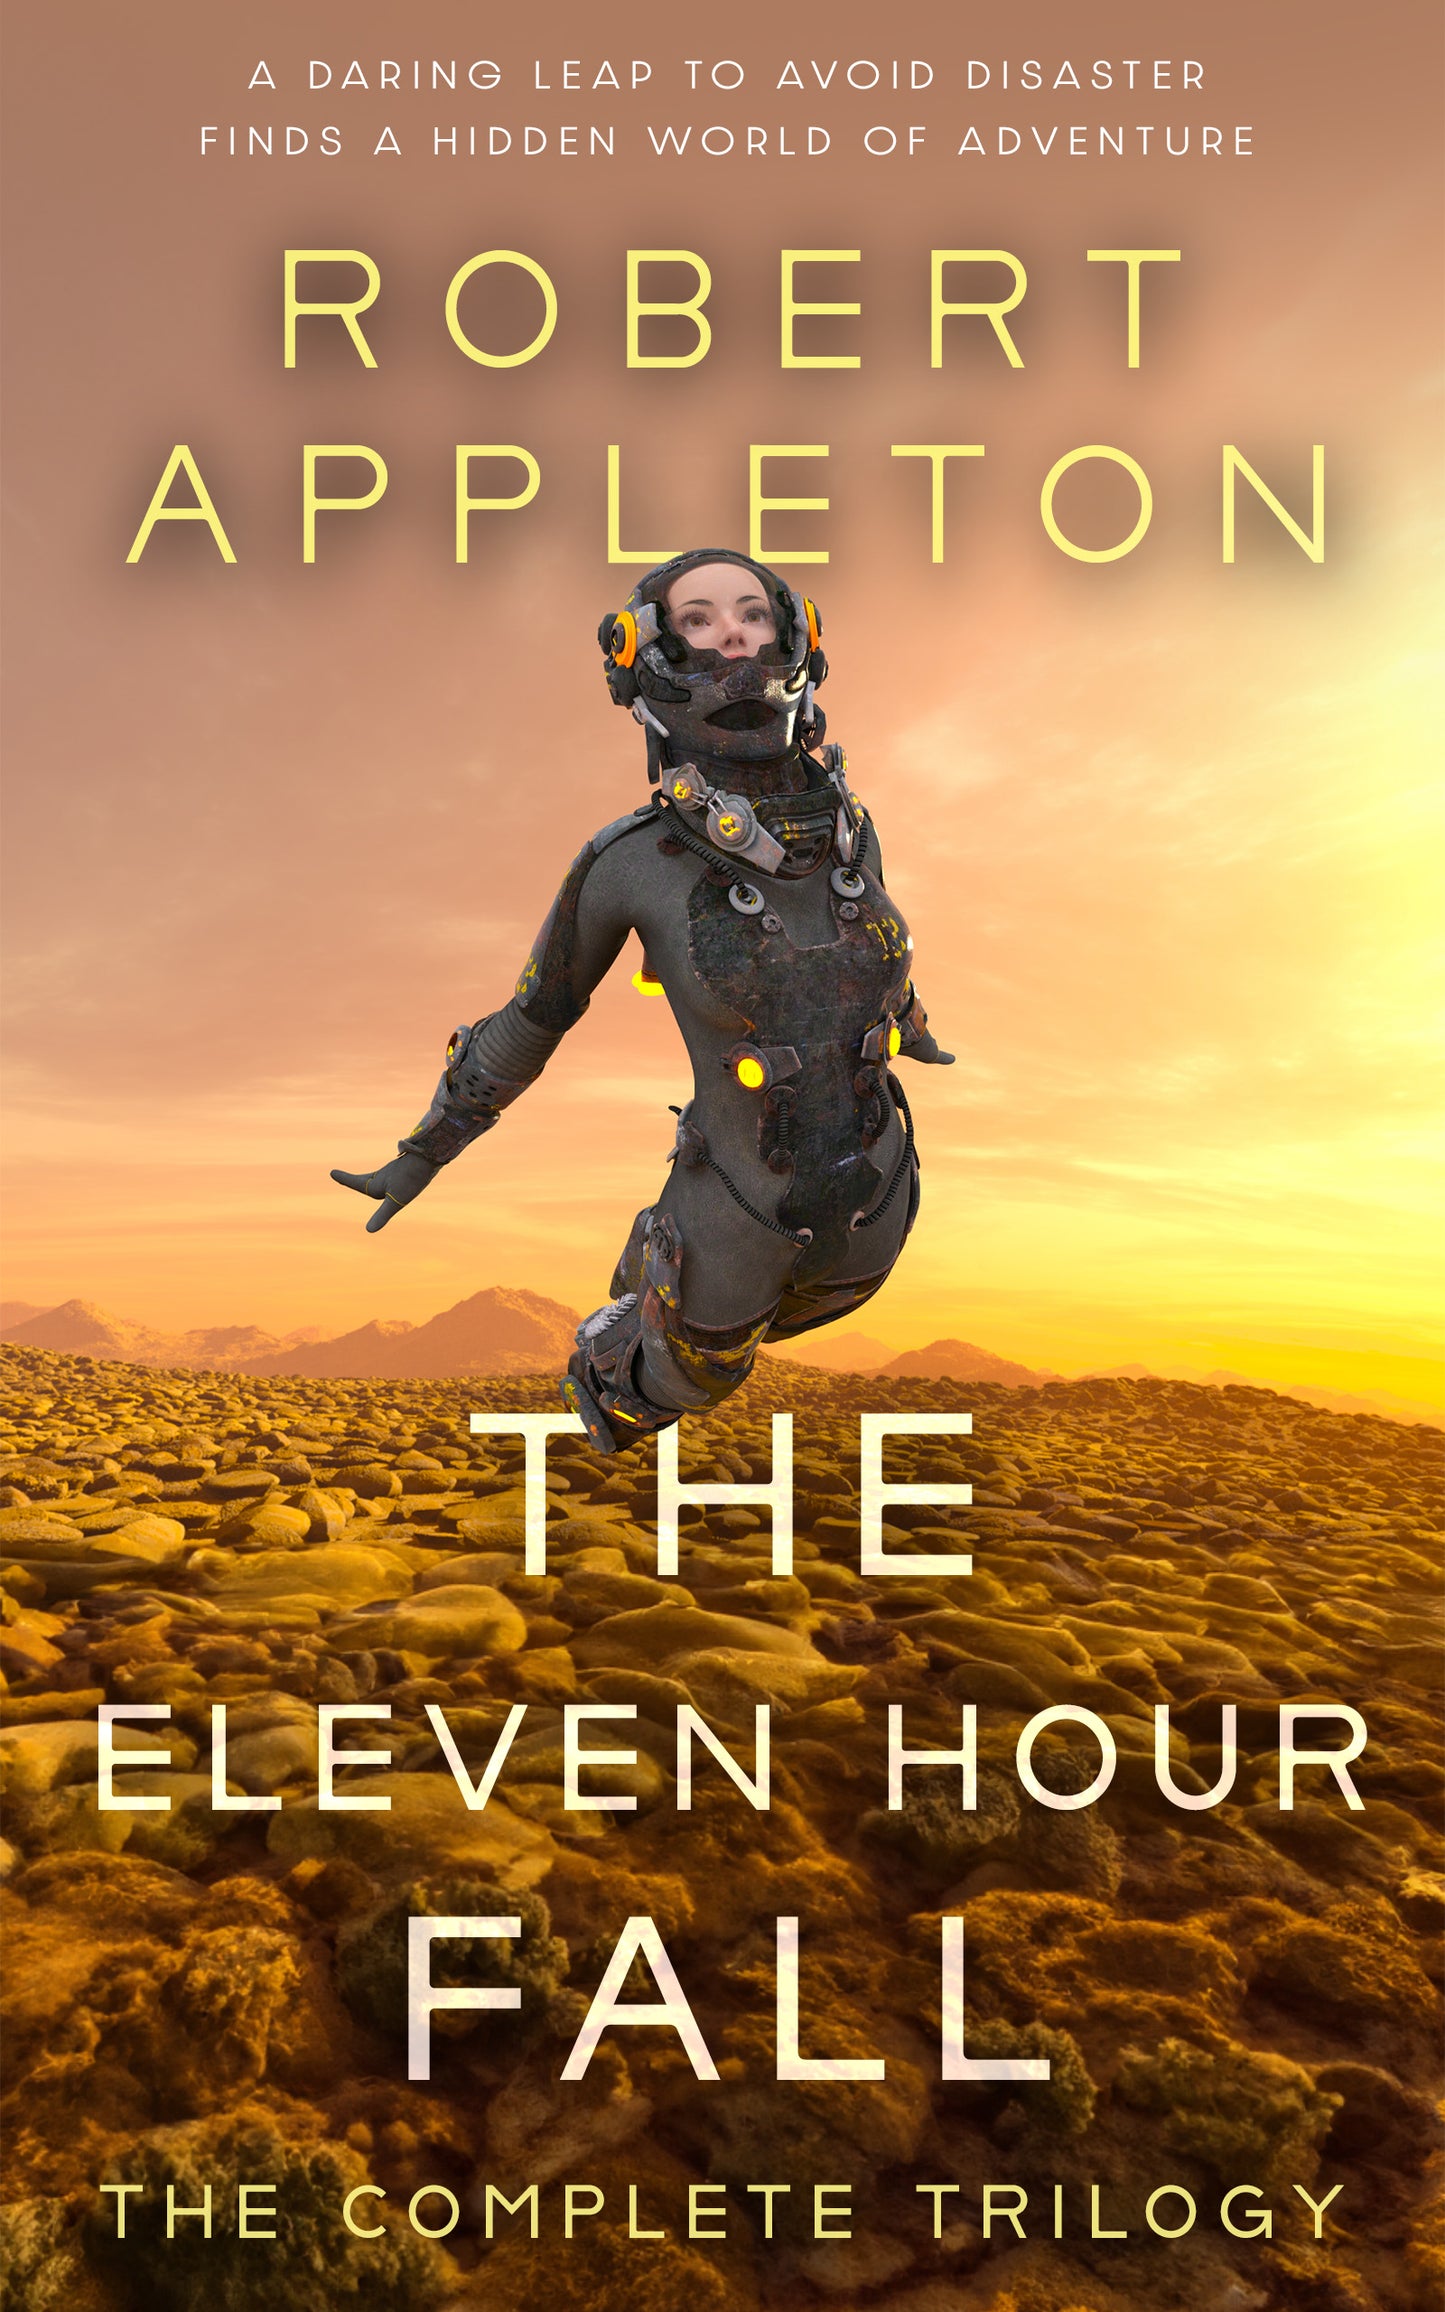 The Eleven Hour Fall - Complete Trilogy (eBook Edition)